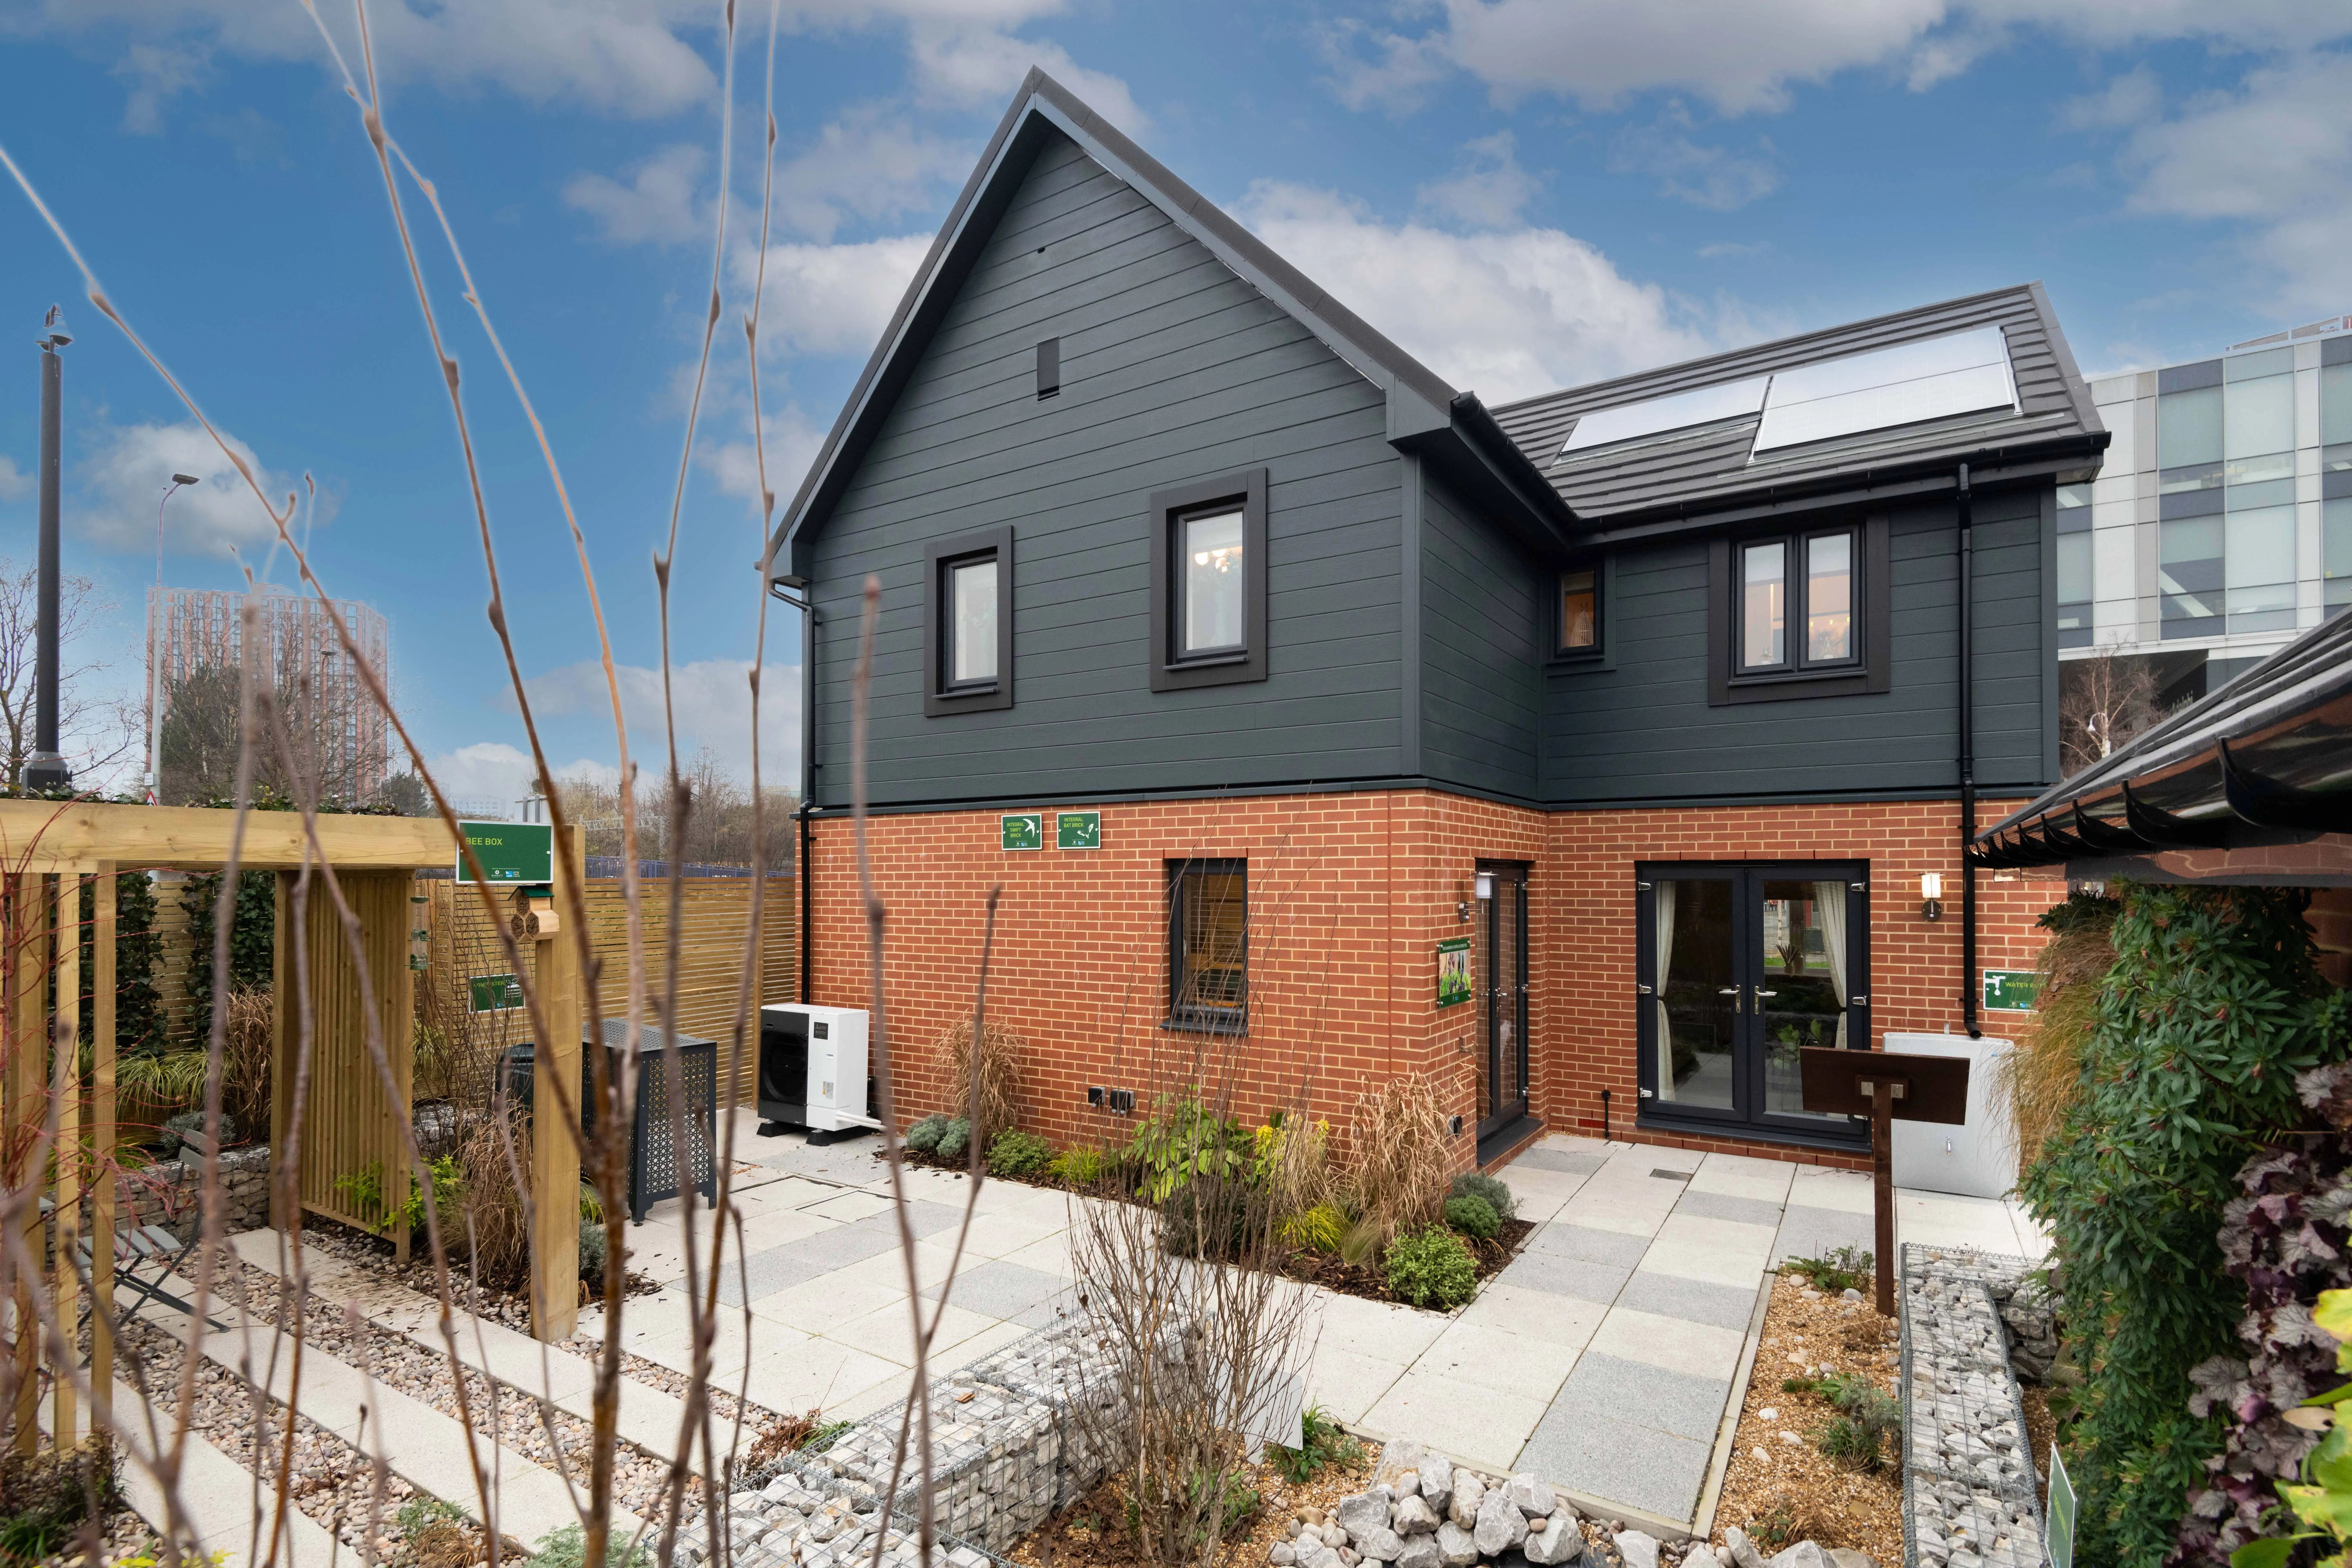 The Zed House is a unique zero carbon concept home that showcases the future of the sustainable living in the UK.